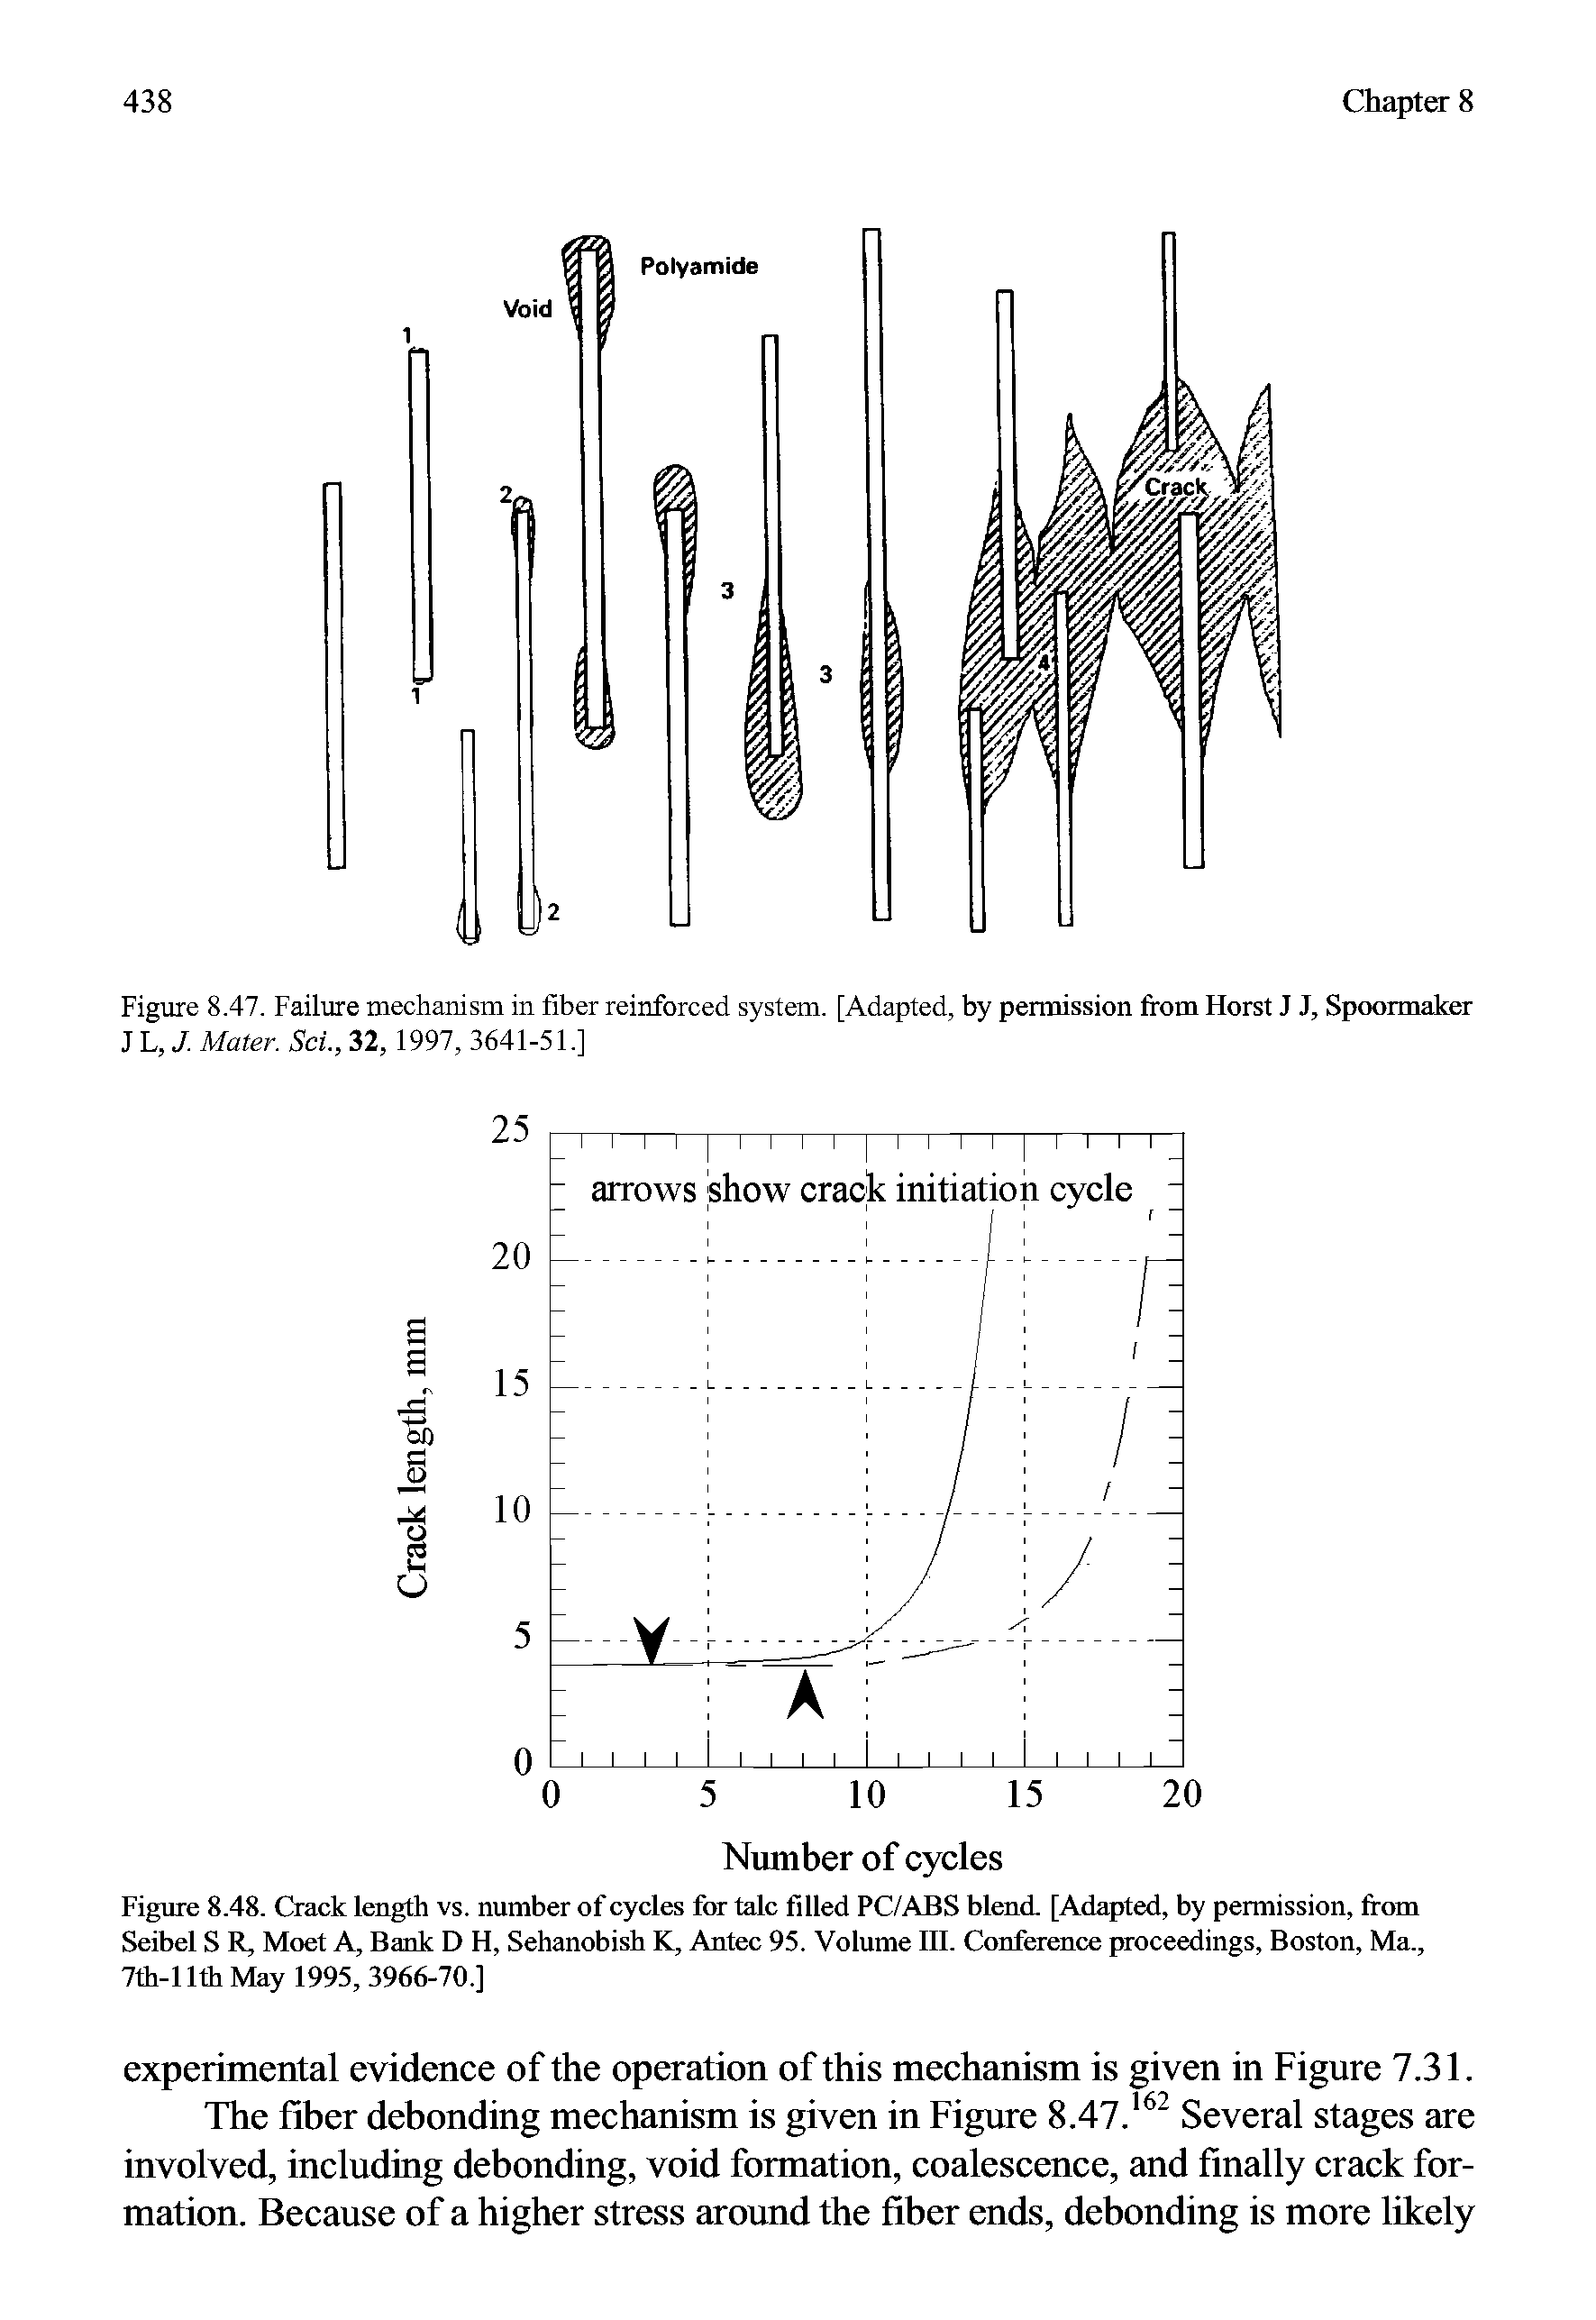 Figure 8.48. Crack length vs. number of cycles for talc filled PC/ABS blend. [Adapted, by pennission, from Seibel S R, Moet A, Bank D H, Sehanobish K, Antec 95. Volume III. Conference proceedings, Boston, Ma, 7th-llth May 1995, 3966-70.]...